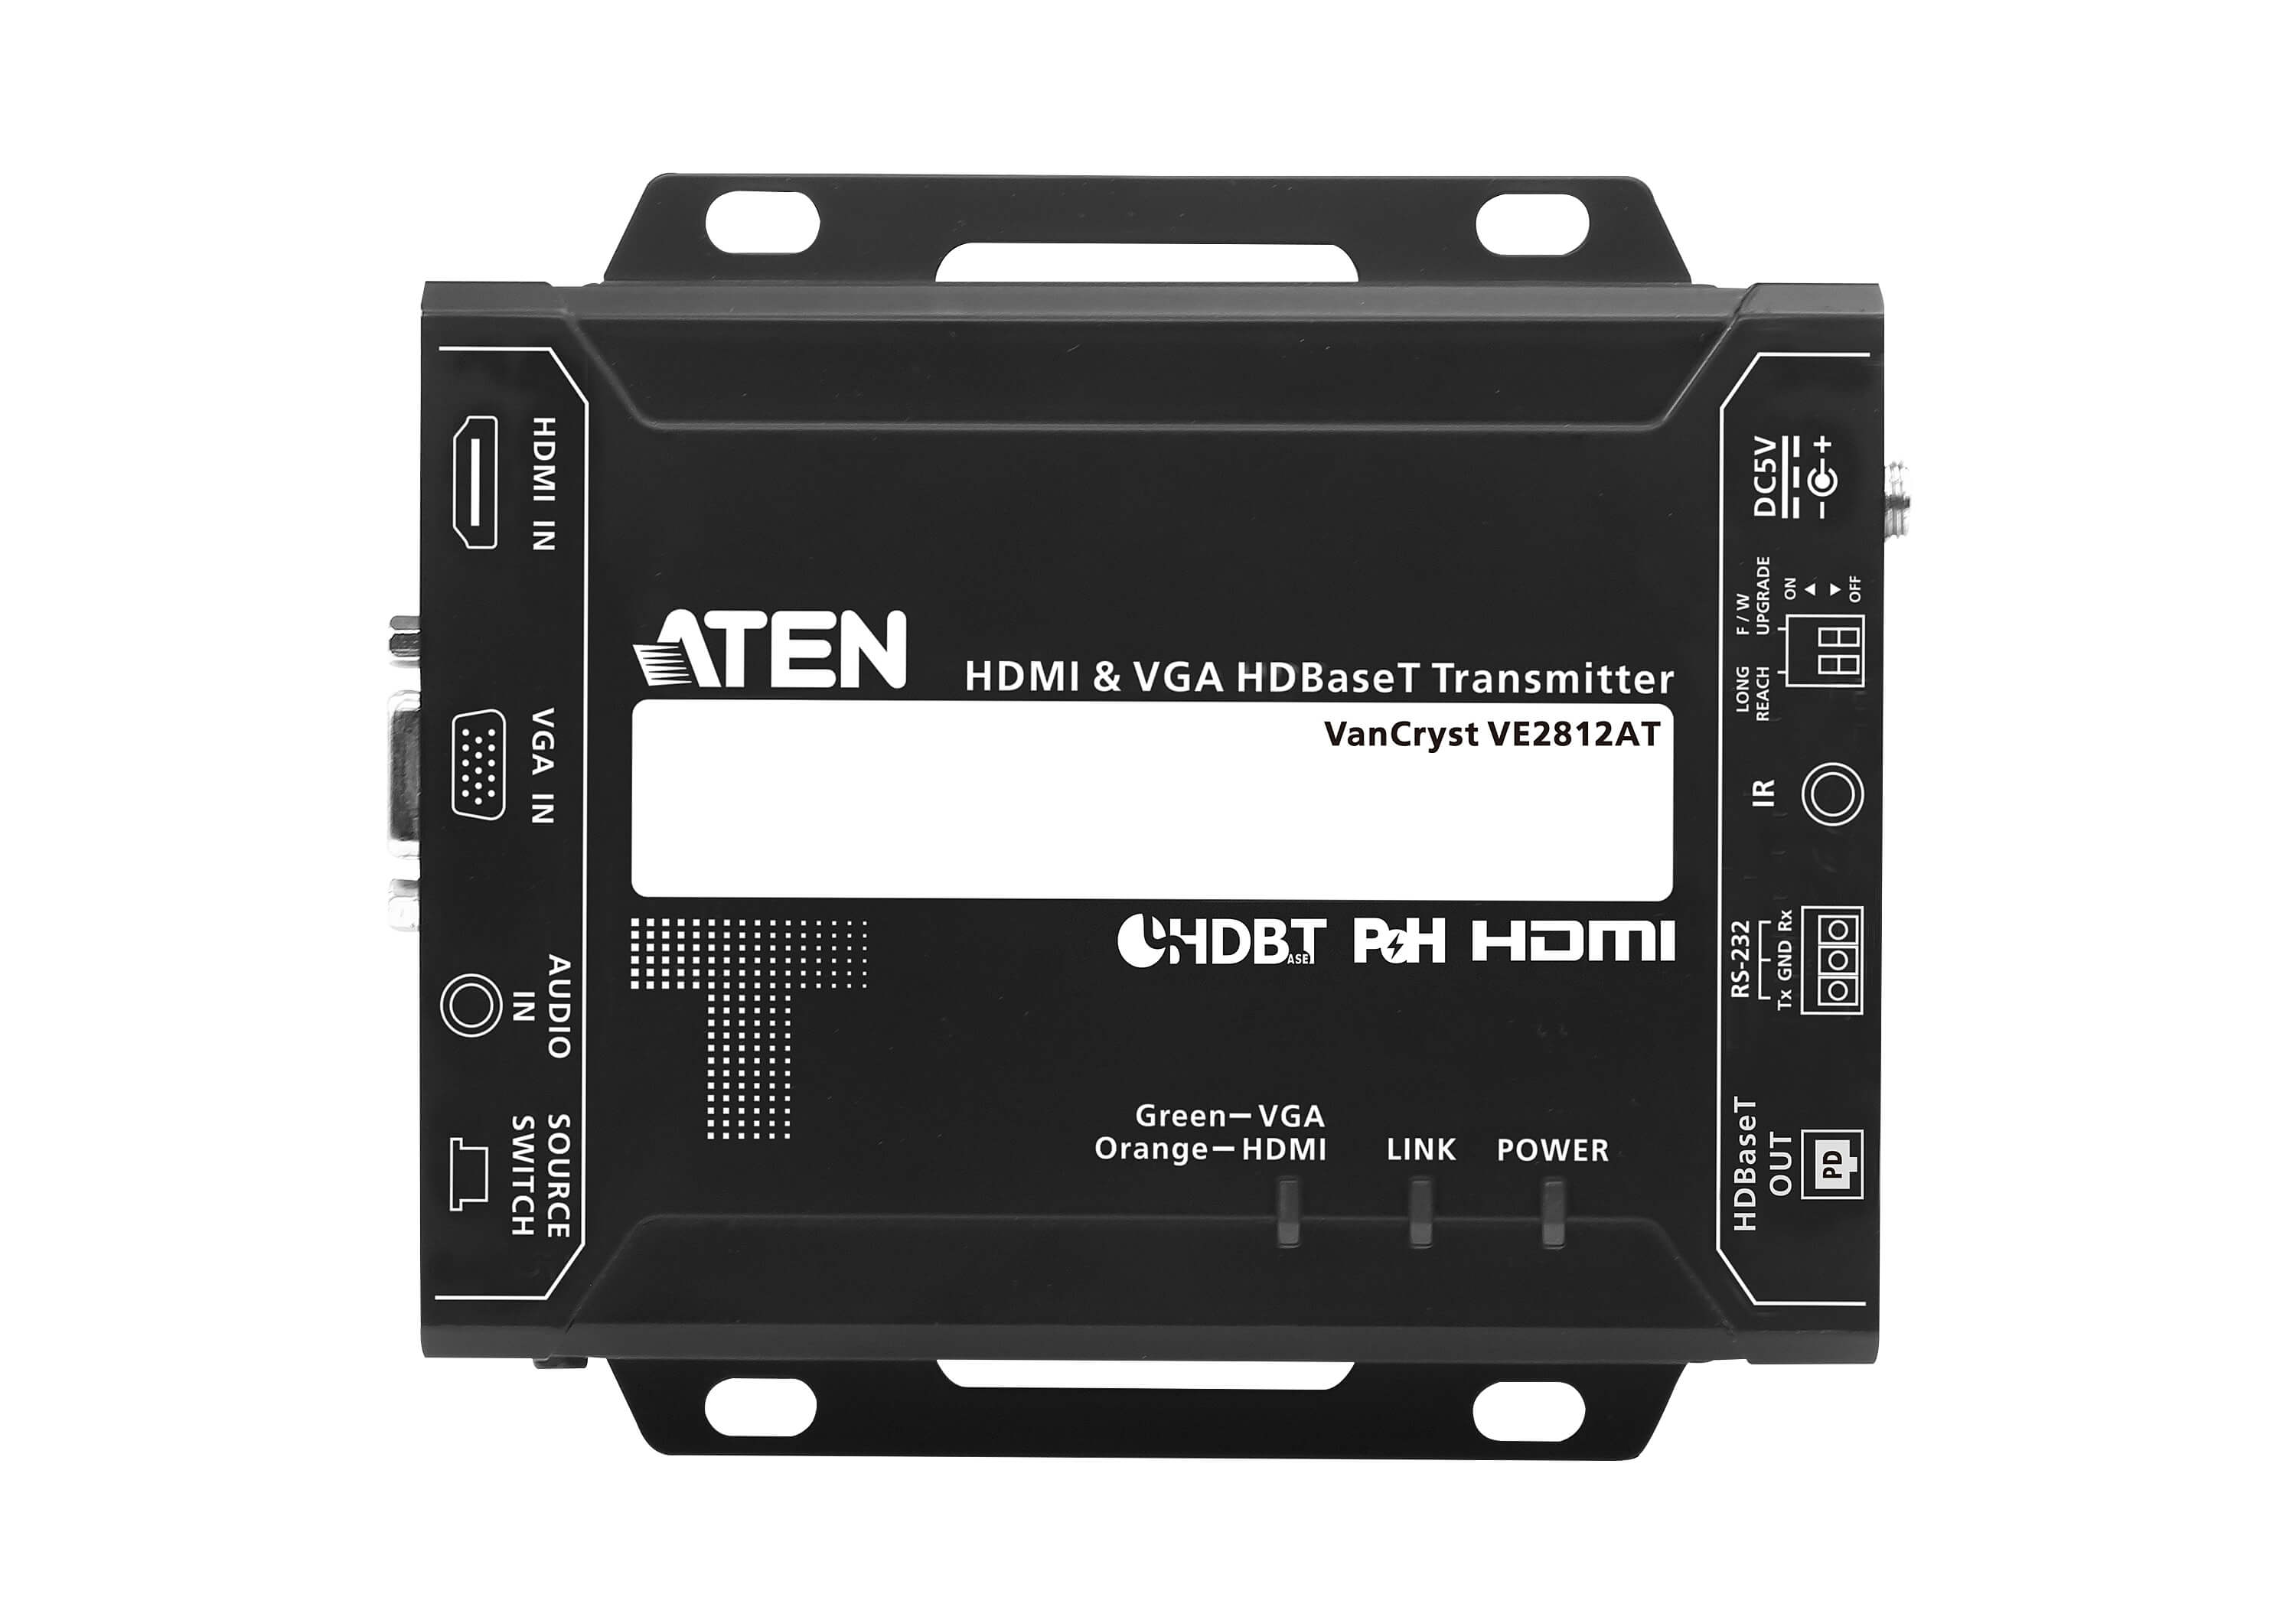 Aten HDMI & VGA HDBaseT Transmitter with POH (4K@100m) (HDBaseT Class A) (PoH PD) -VE2812AT (3 Year Manufacture Local Warranty In Singapore)